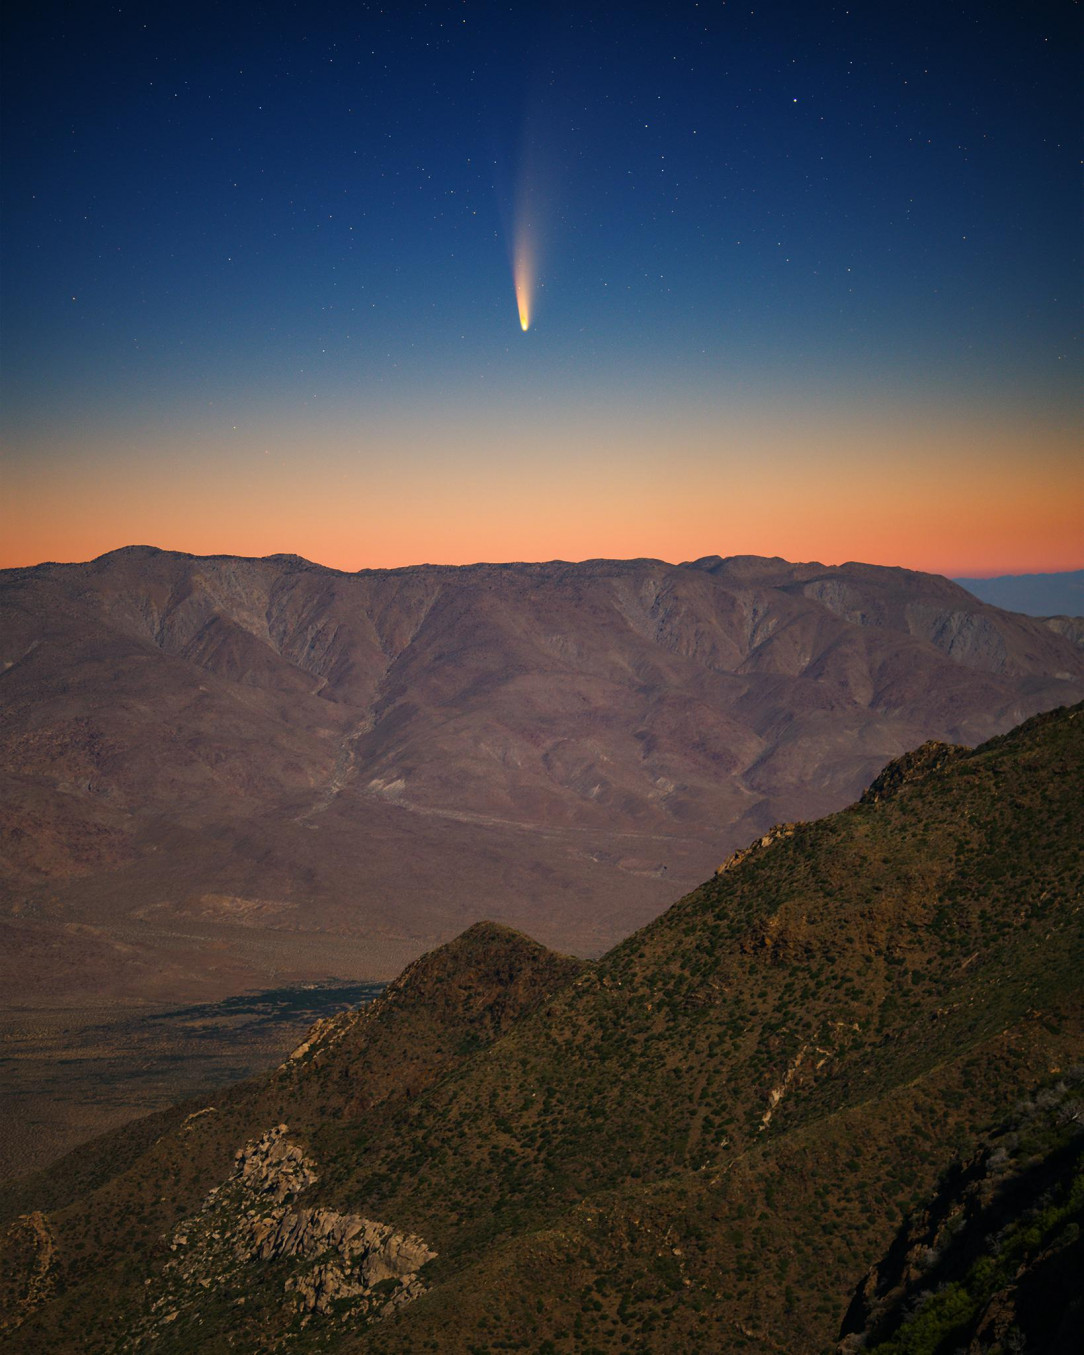 Insanely beautiful Comet NEOWISE from Mount Laguna, California!